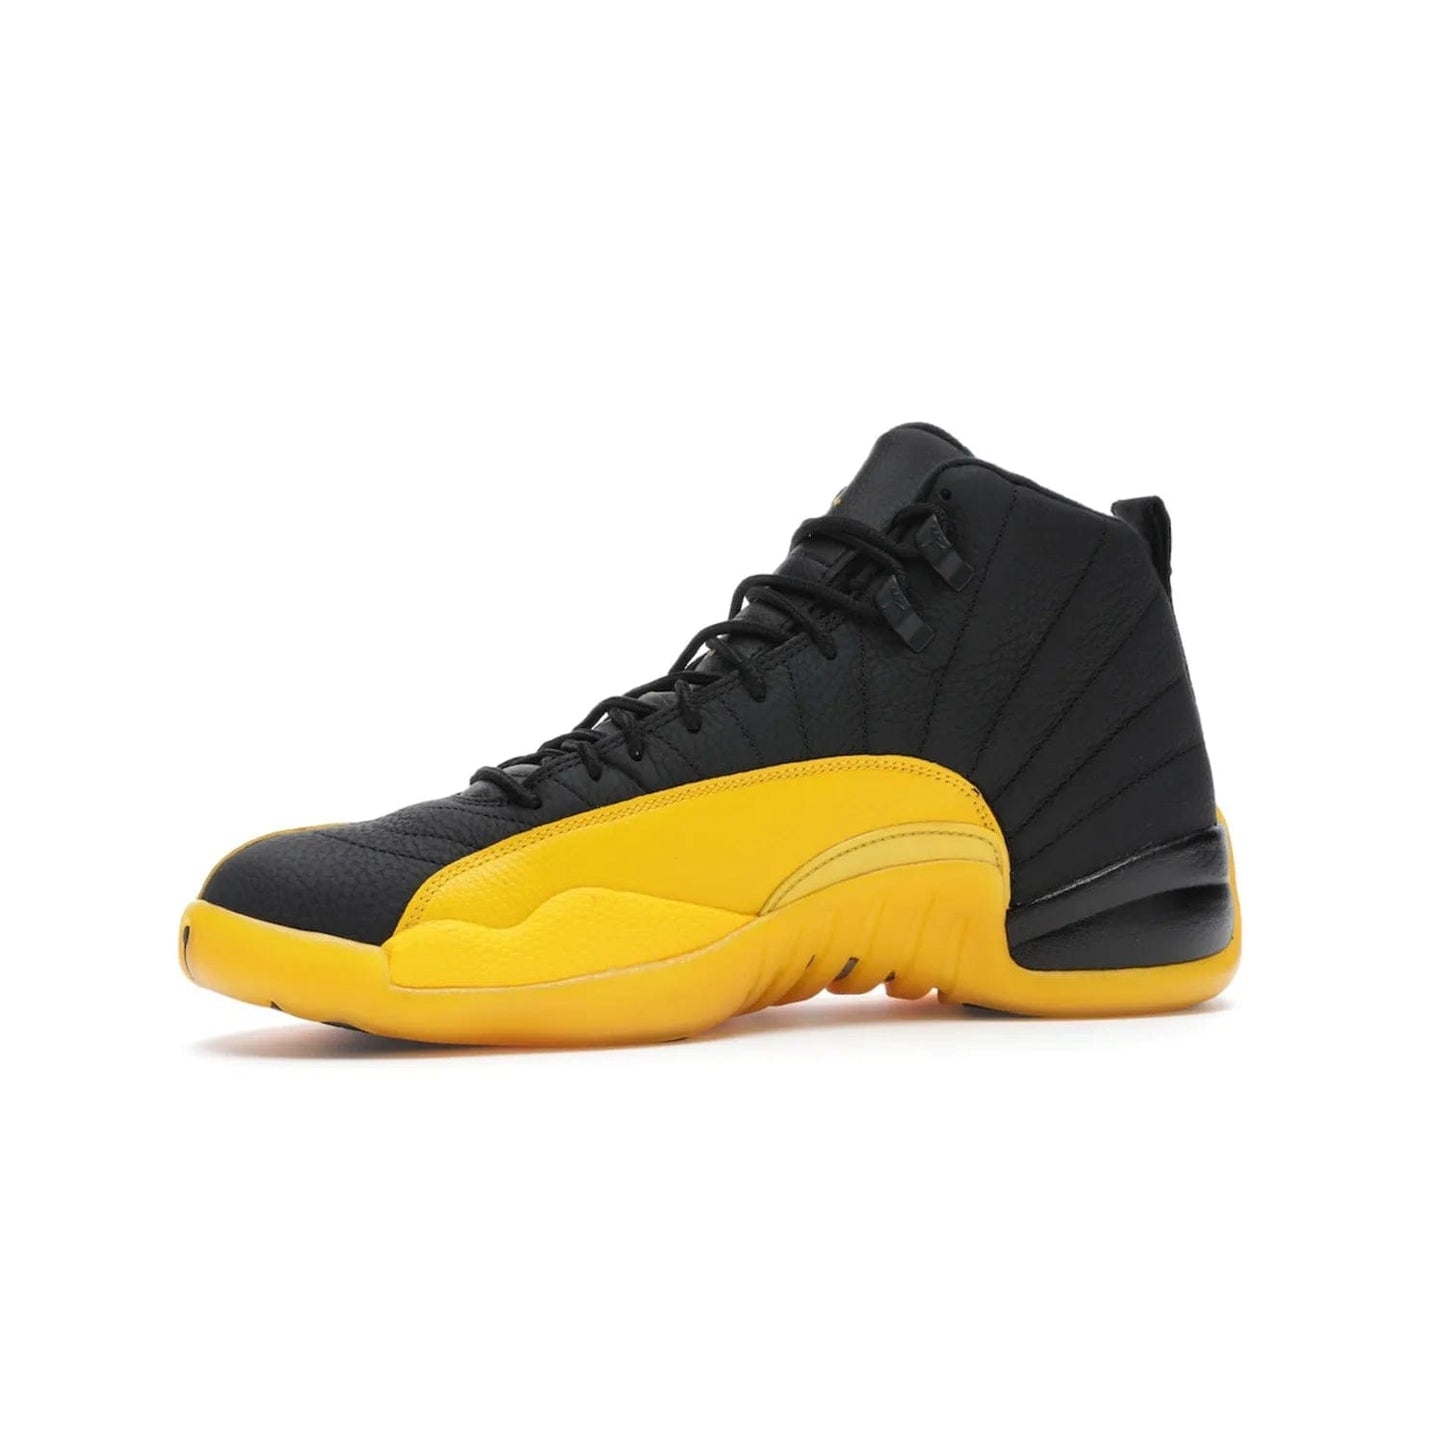 Jordan 12 Retro Black University Gold - Image 17 - Only at www.BallersClubKickz.com - This Jordan 12 Retro features a black tumbled leather upper and University Gold accents for a modern twist. Boasting Jordan "Two Three" branding and a yellow sole, these shoes will elevate your wardrobe. Fresh, sleek, and one of a kind - the Jordan 12 University Gold is your summer sneaker.